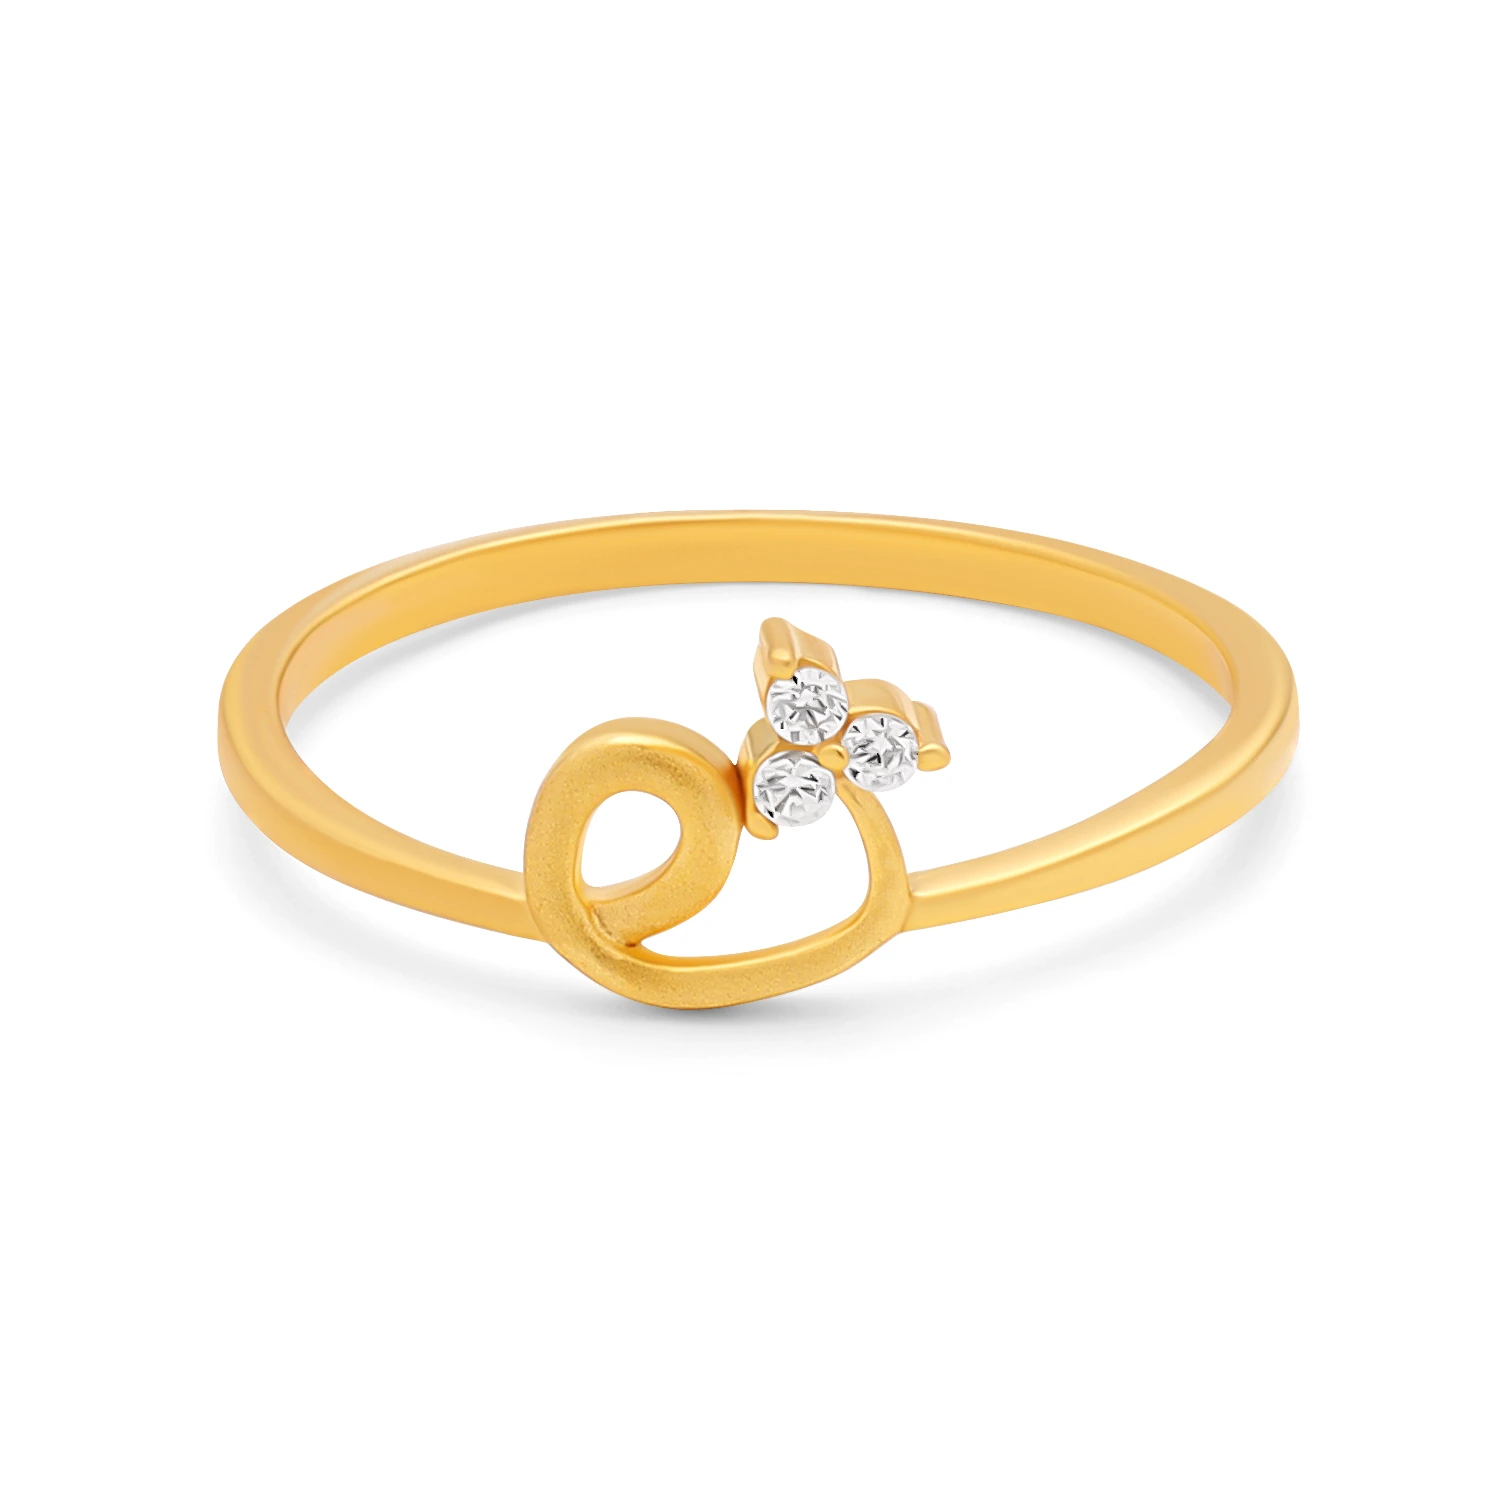 Malabar Gold and Diamonds 22 KT Yellow gold Casual Ring for Women, BIS  Hallmark 916 gold certified FRDZL24429_Y_11 : Amazon.in: Jewellery